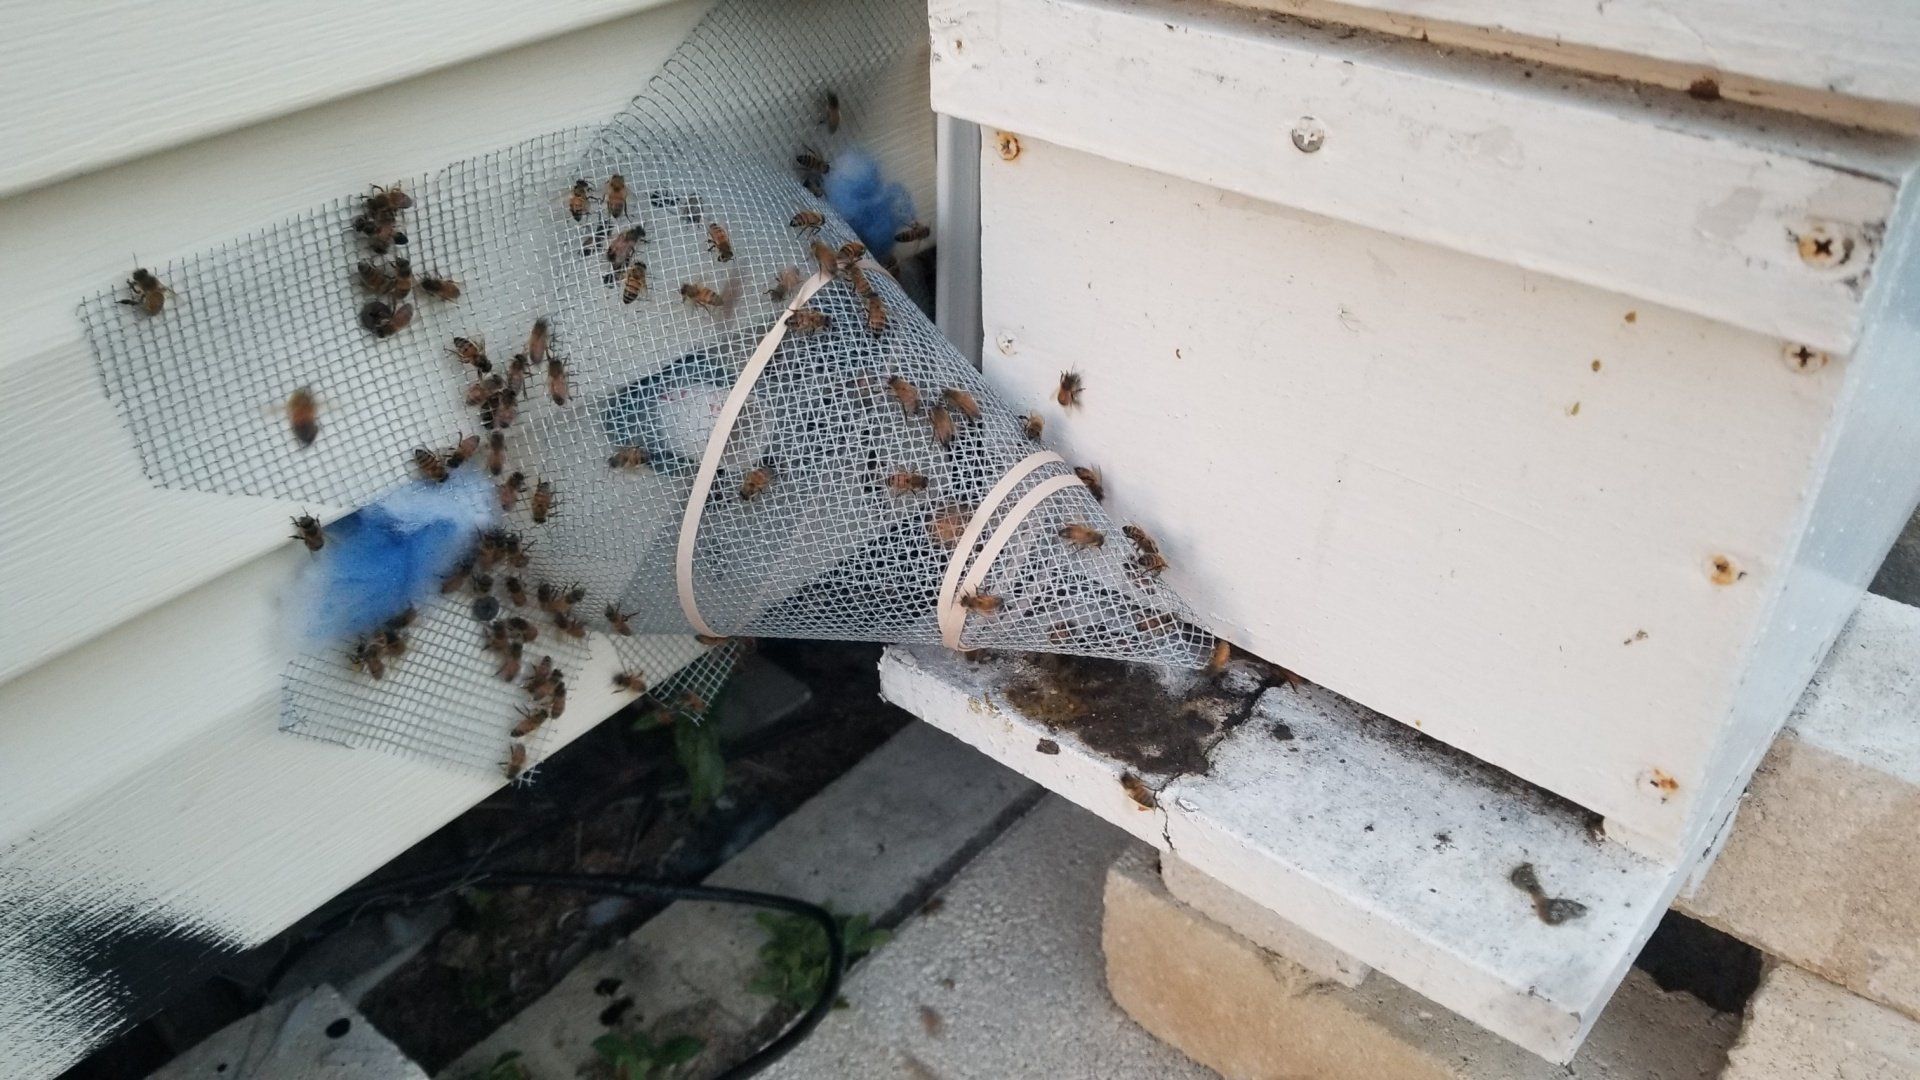 Bee Removal | Live Bee Removal | Clearwater, FL How To Get Bees Out Of Garage